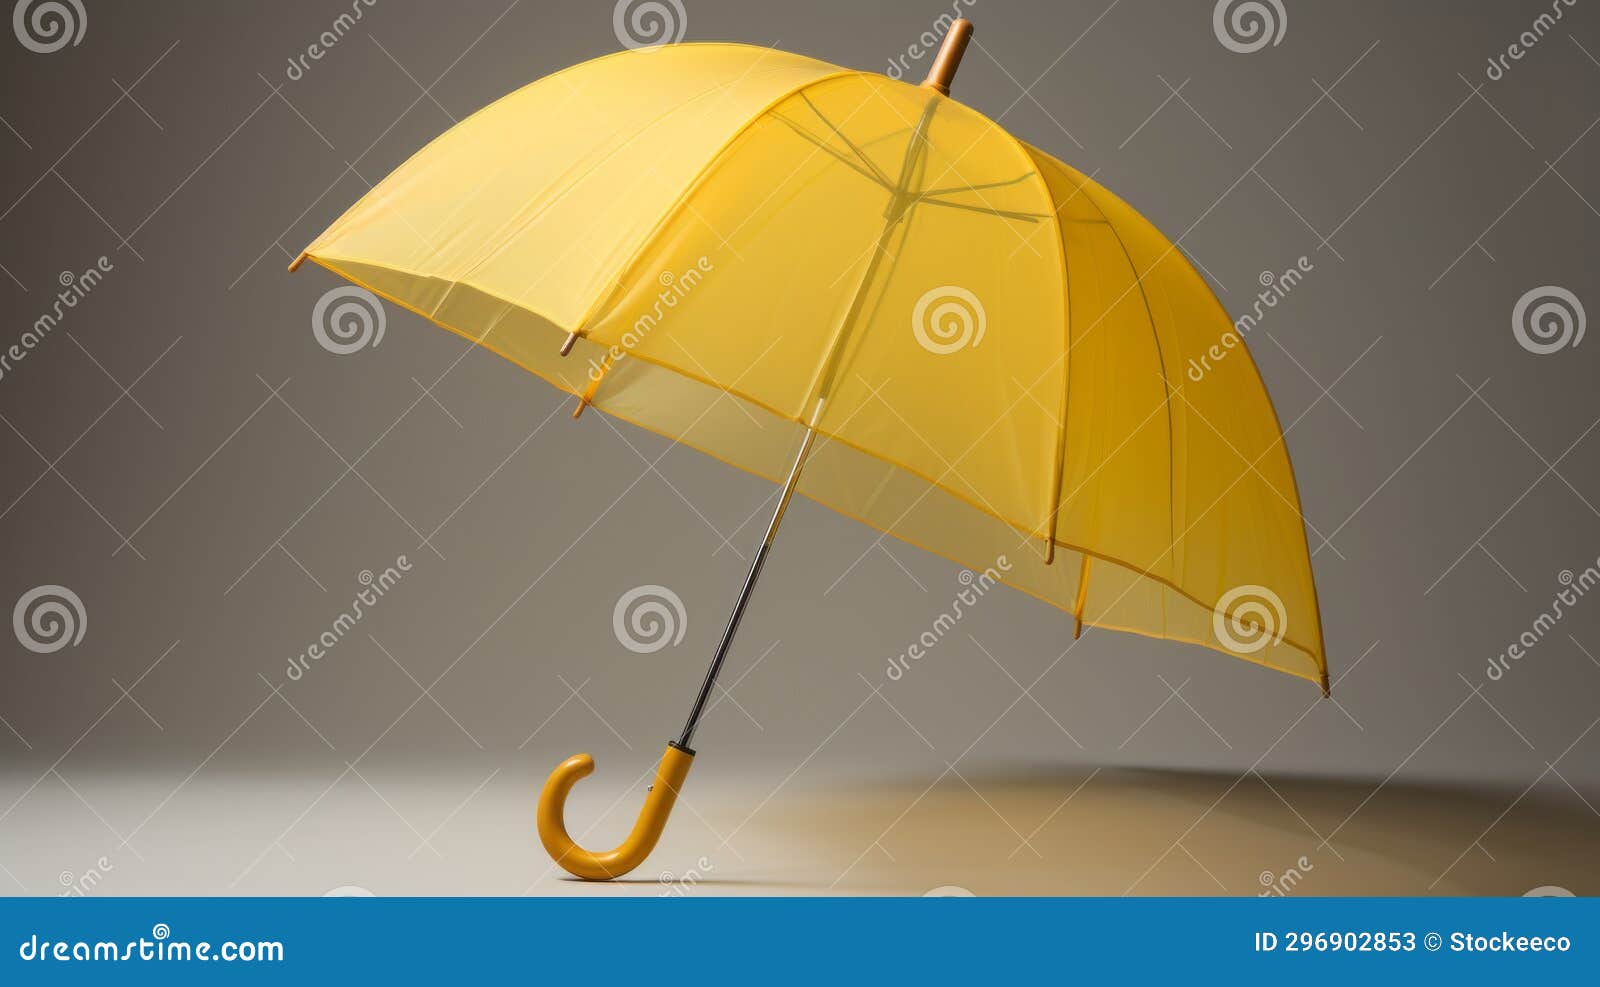 Yellow Umbrella in Zbrush Style: Precise Hyperrealism with Smooth